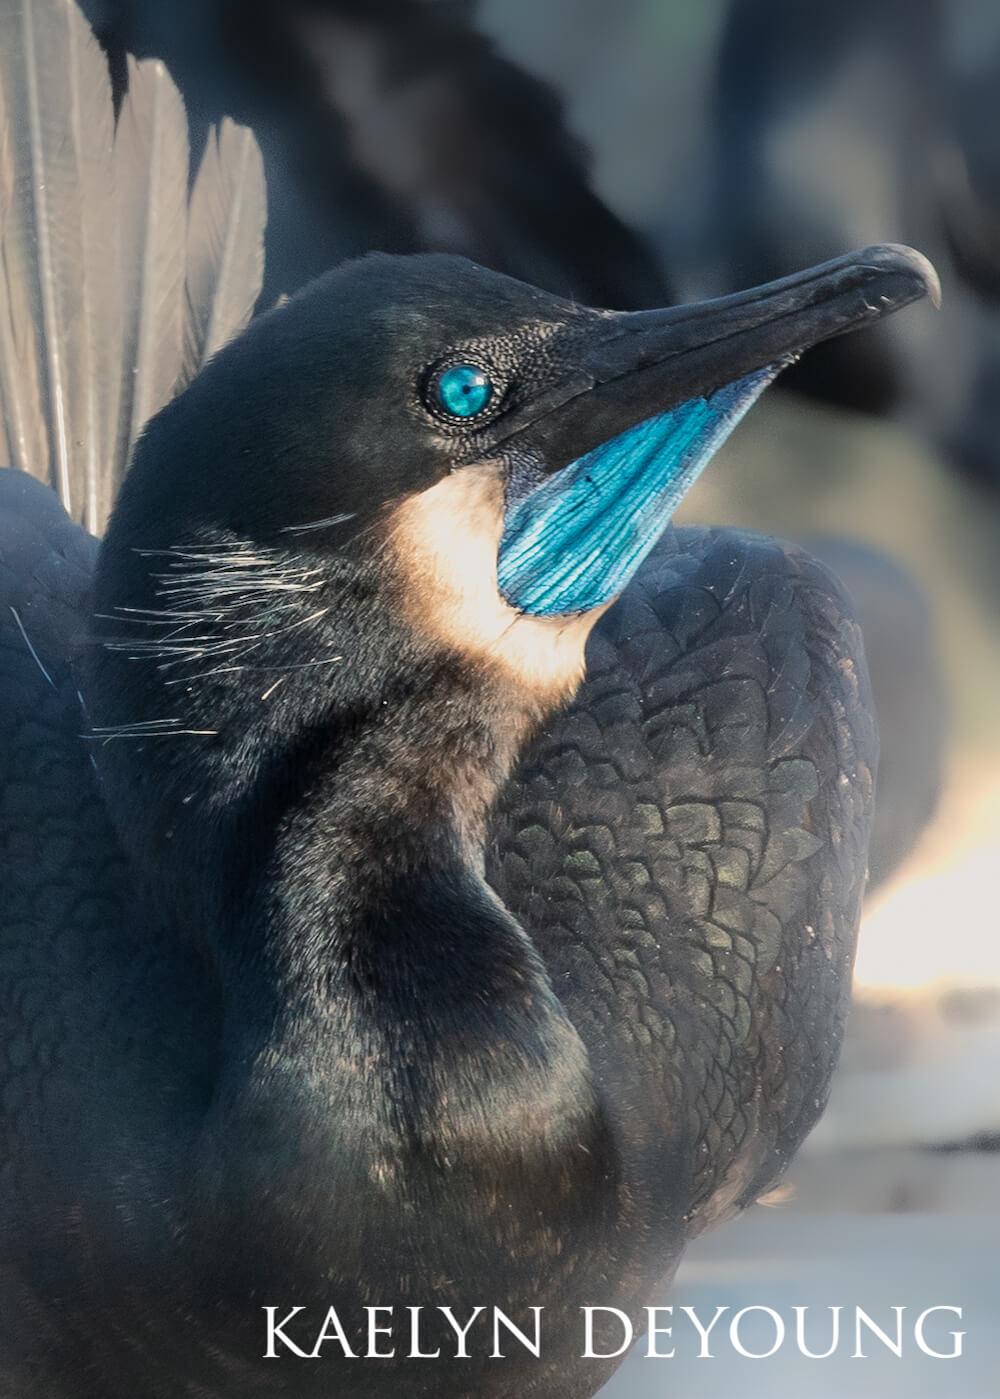 Brandt's cormorant displaying its jewel-blue throat and eyes.